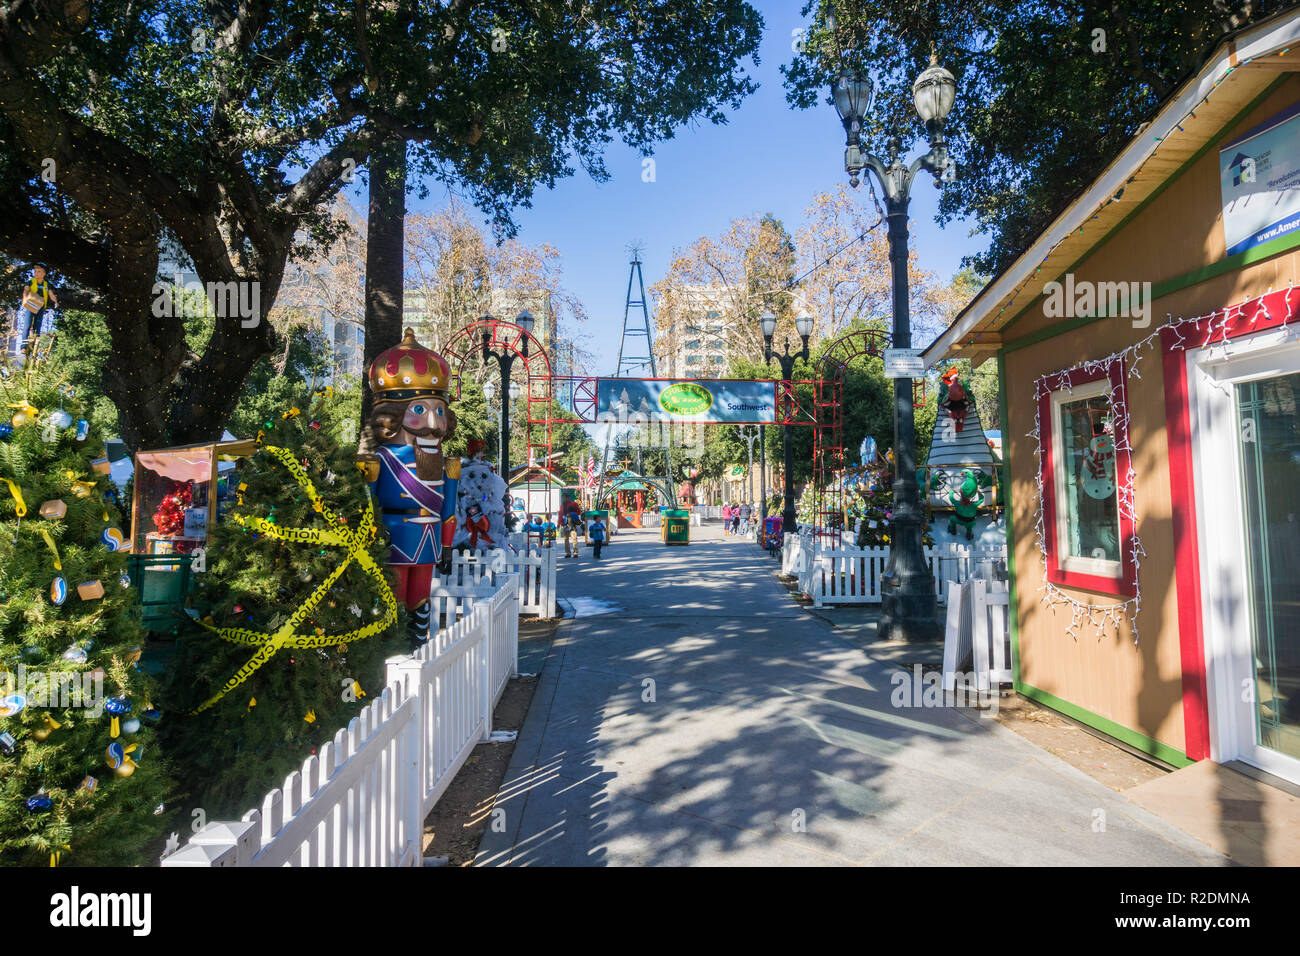 December 6, 2017 San Jose / CA / USA - Alley and exhibits at 'Christmas in the park' event in Plaza de Cesar Chavez, Silicon Valley, south San Francis Stock Photo